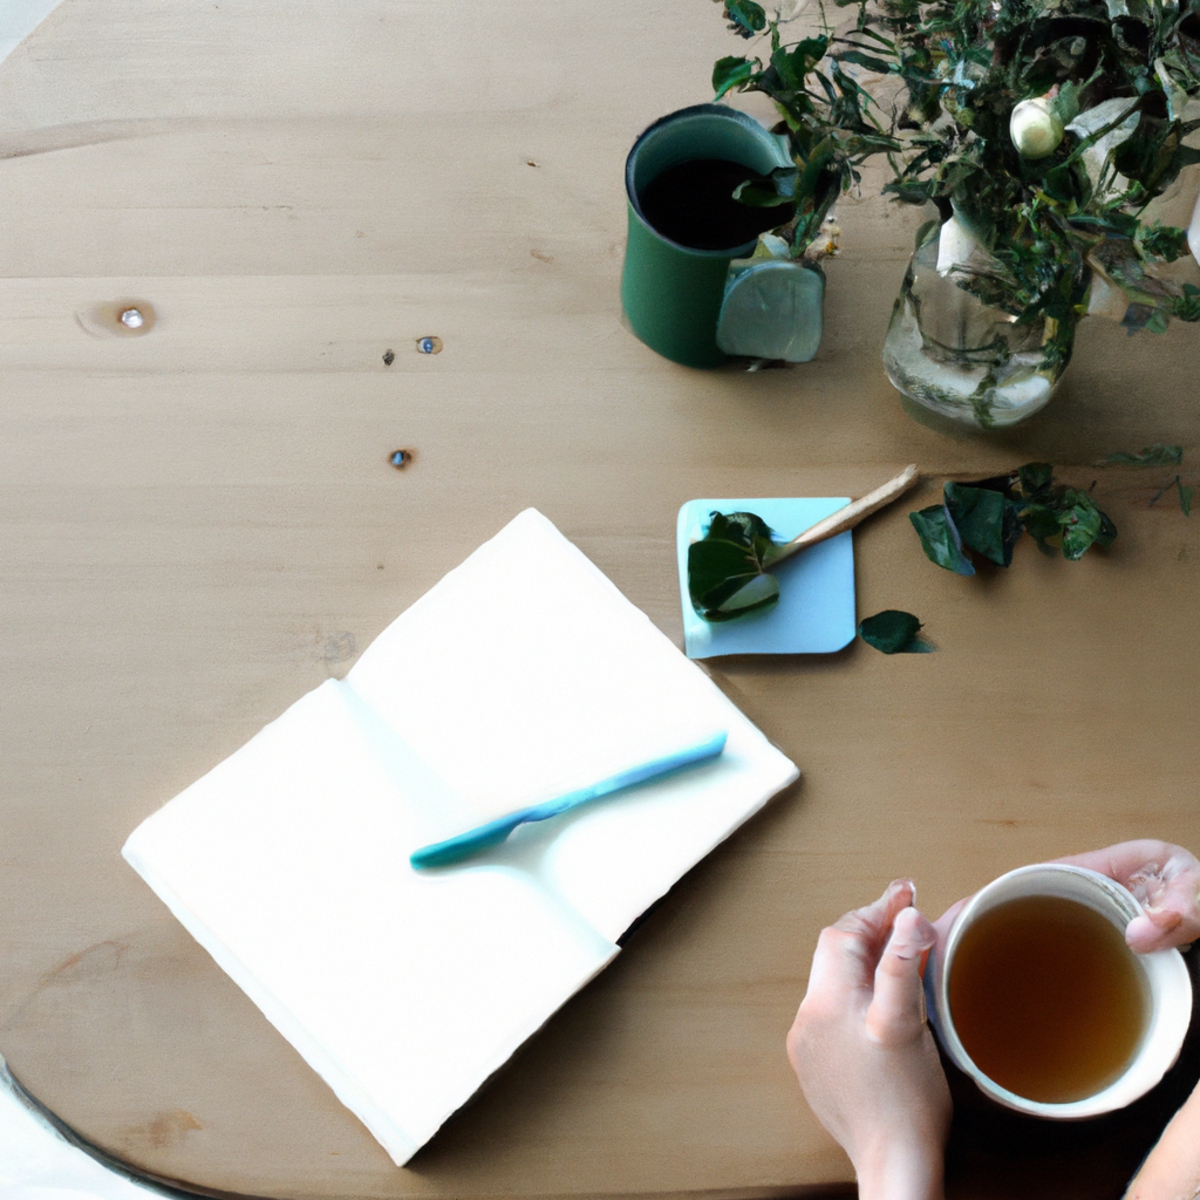 A serene photo of self-reflection and personal growth with a journal, pen, and cup of tea on a wooden desk -Self-care tips